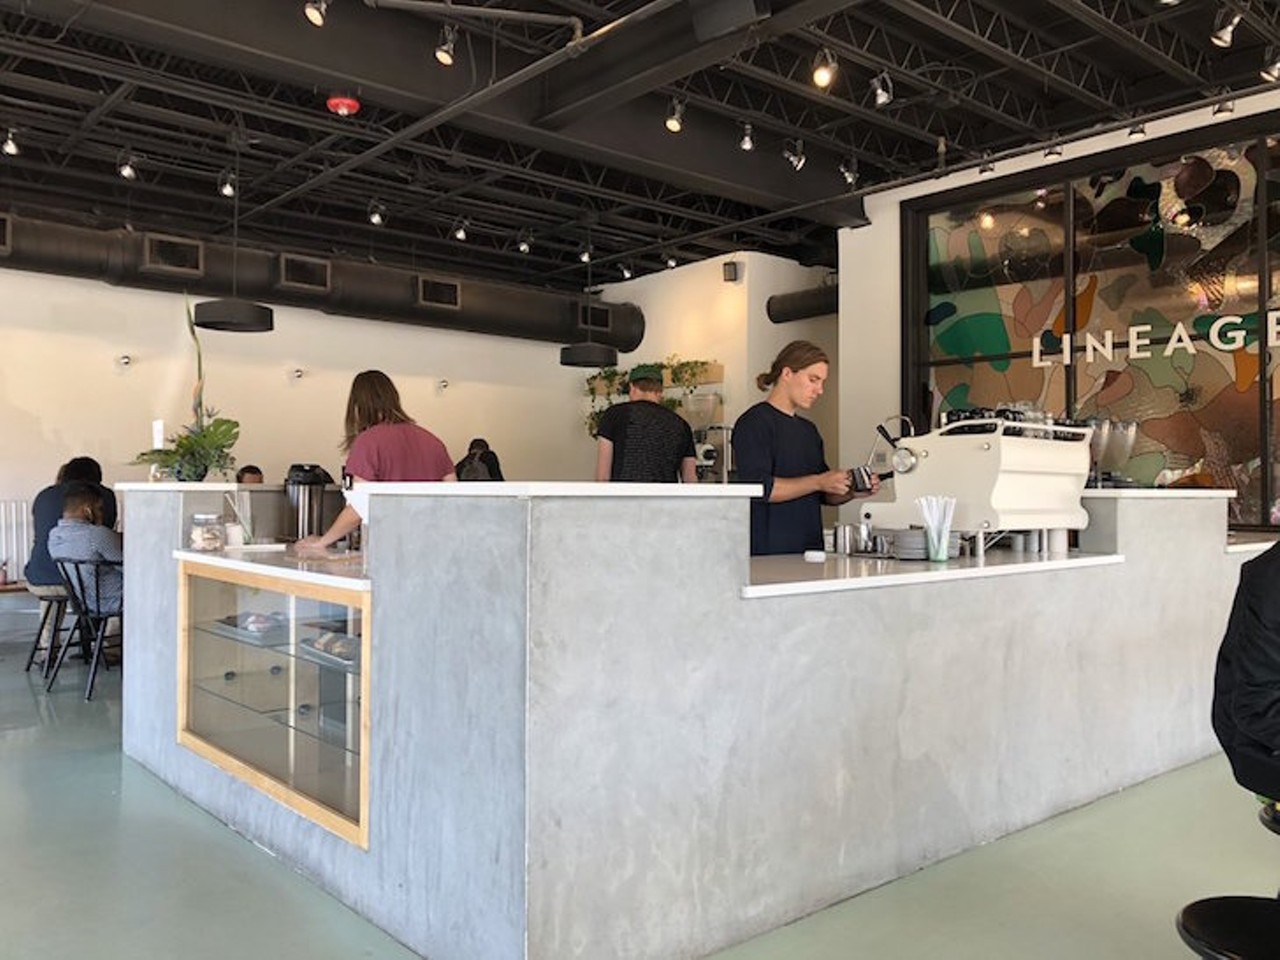 Lineage  
1011 E. Colonial Drive, 407-205-8096
The sister store to the original one tucked away in East End Market, they are best known for their delicious cold brew coffee. This minimal-style shop is definitely Instagram worthy so grab a honey iced latte head on over. 
Photo via Yelp/Jones L.